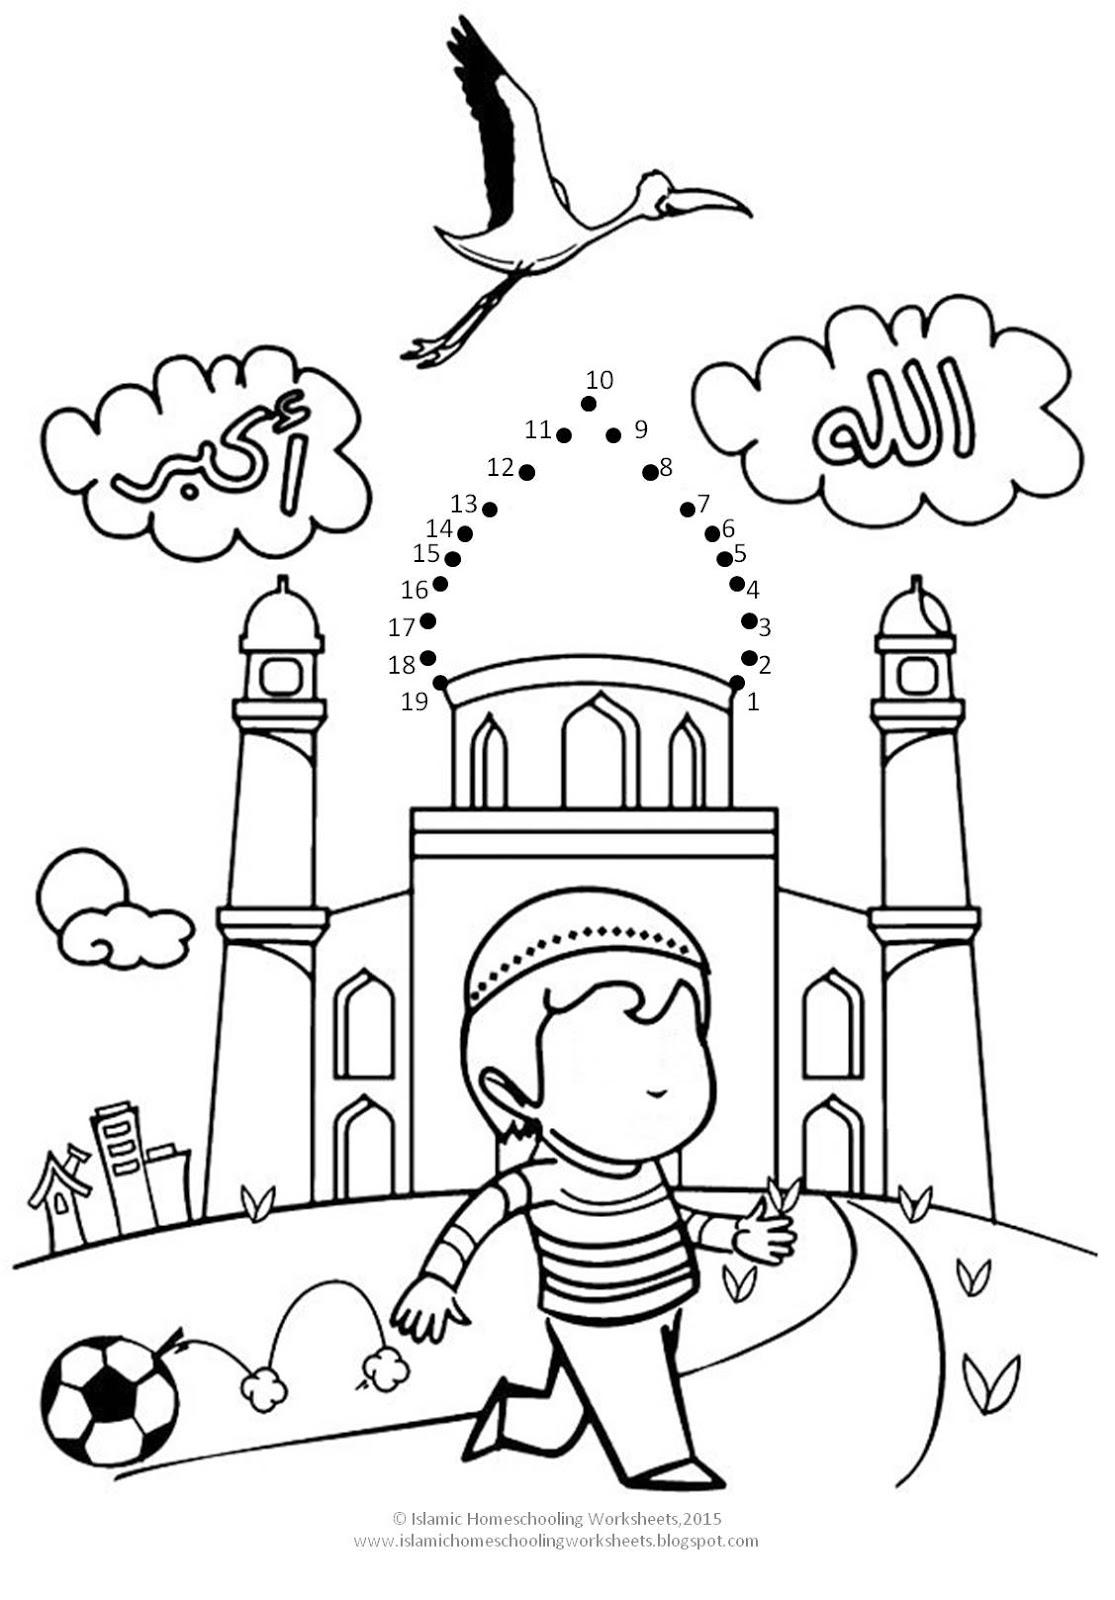 Download FREE Islamic Joining the Dots / Connect the Dots / Dot-to Dot Worksheets ~ Islamic Homeschooling ...